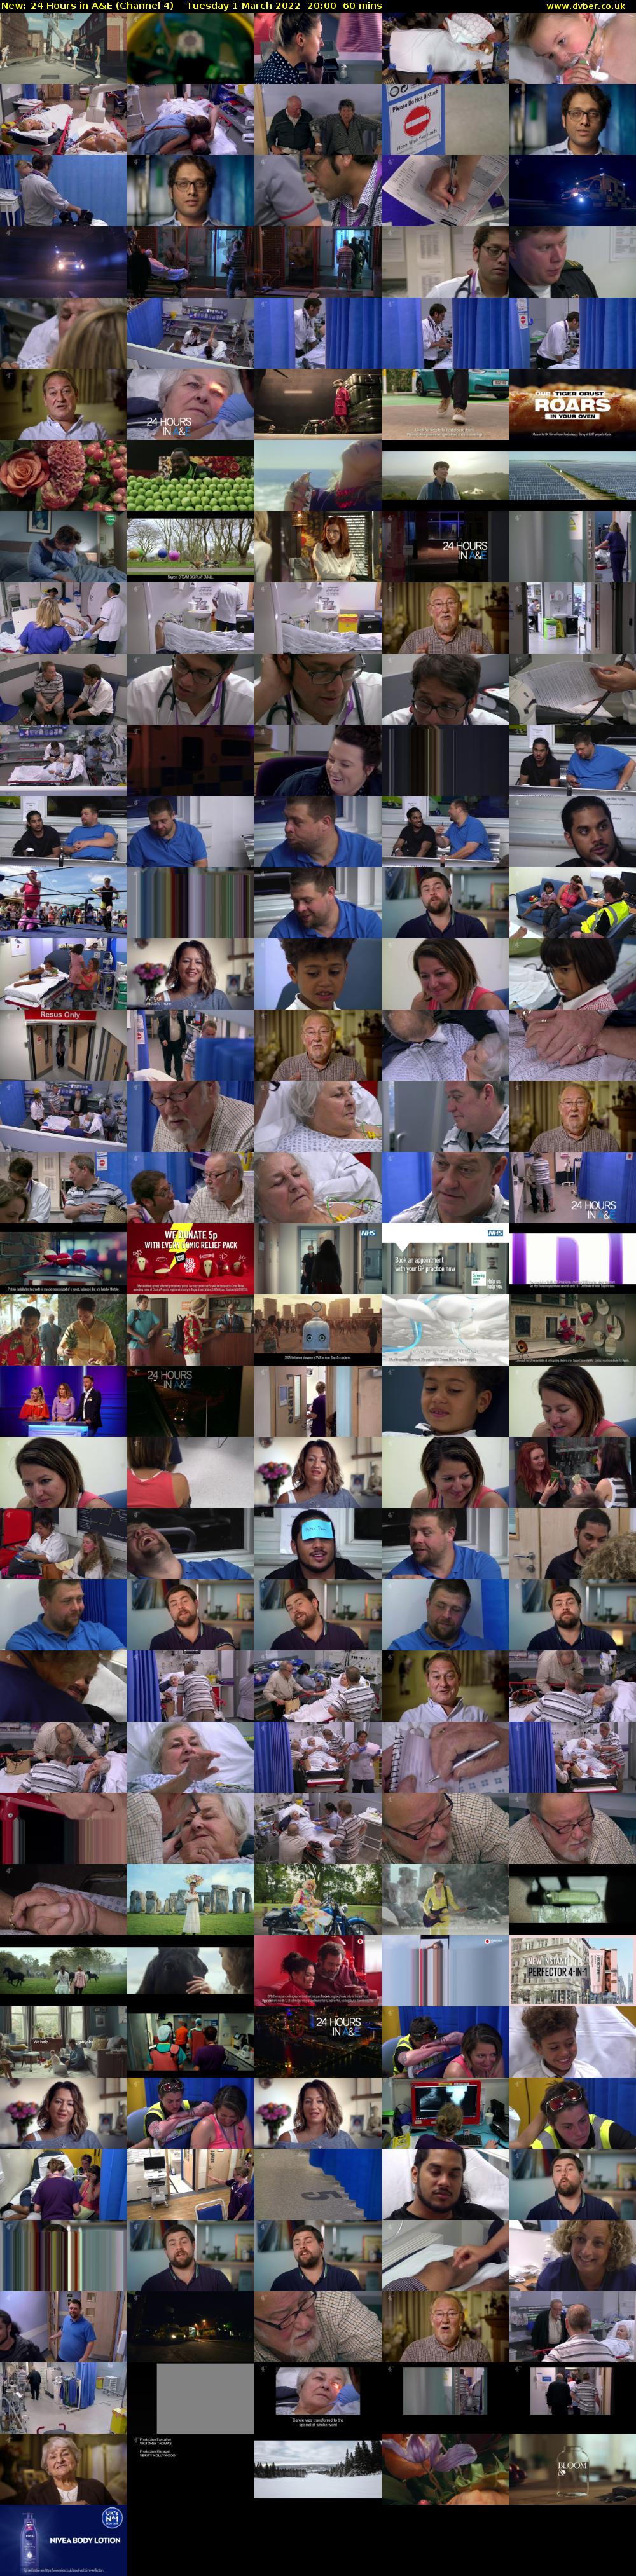 24 Hours in A&E (Channel 4) Tuesday 1 March 2022 20:00 - 21:00